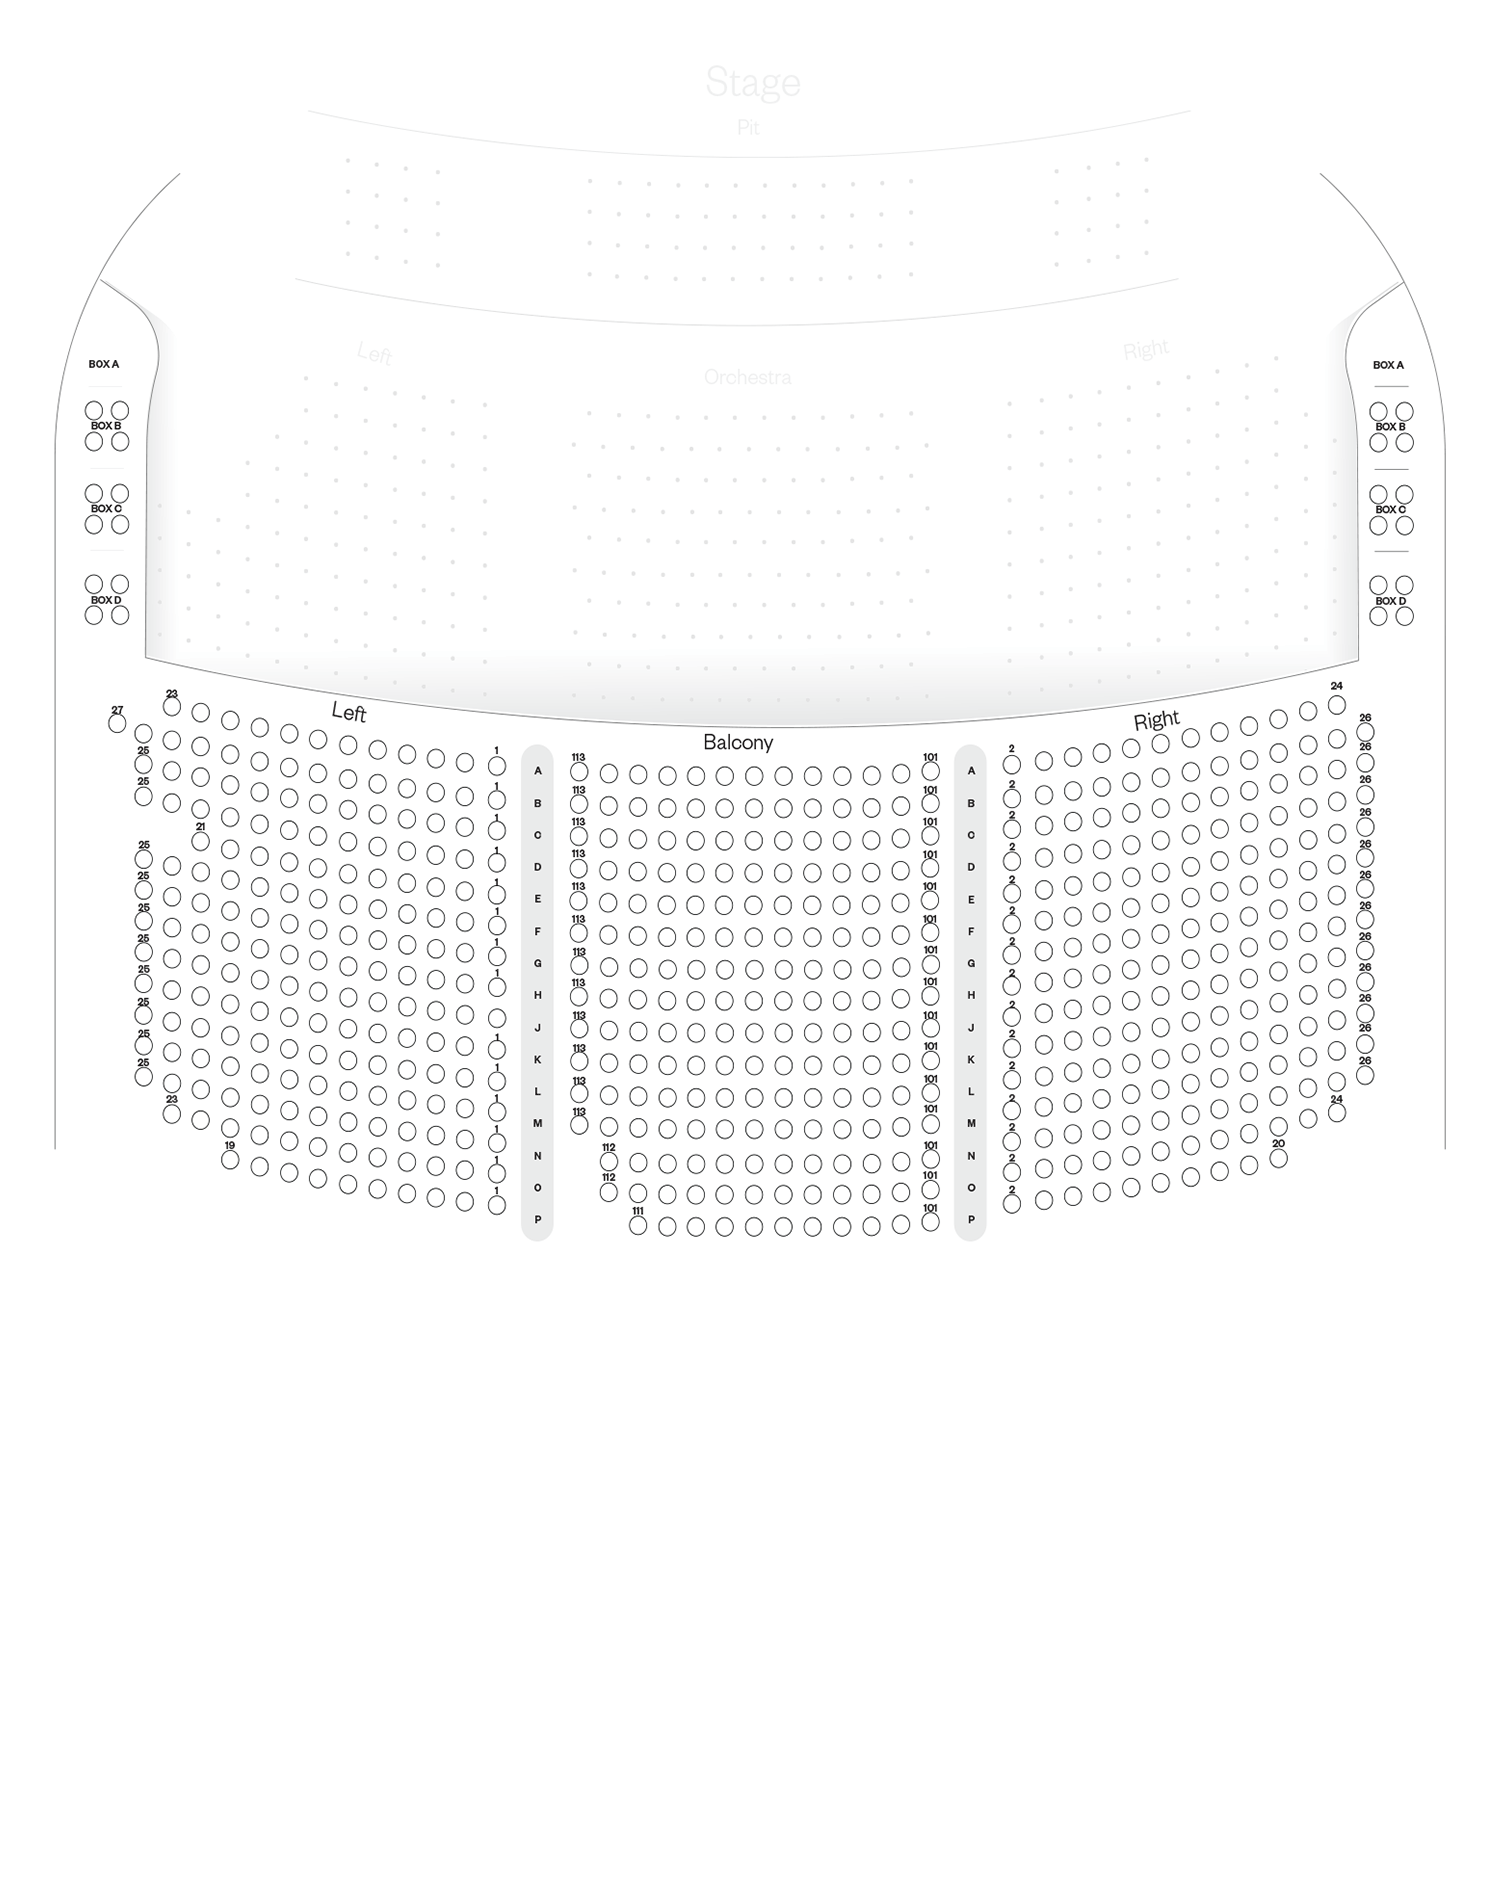 Miller Theater Balcony Seating Chart